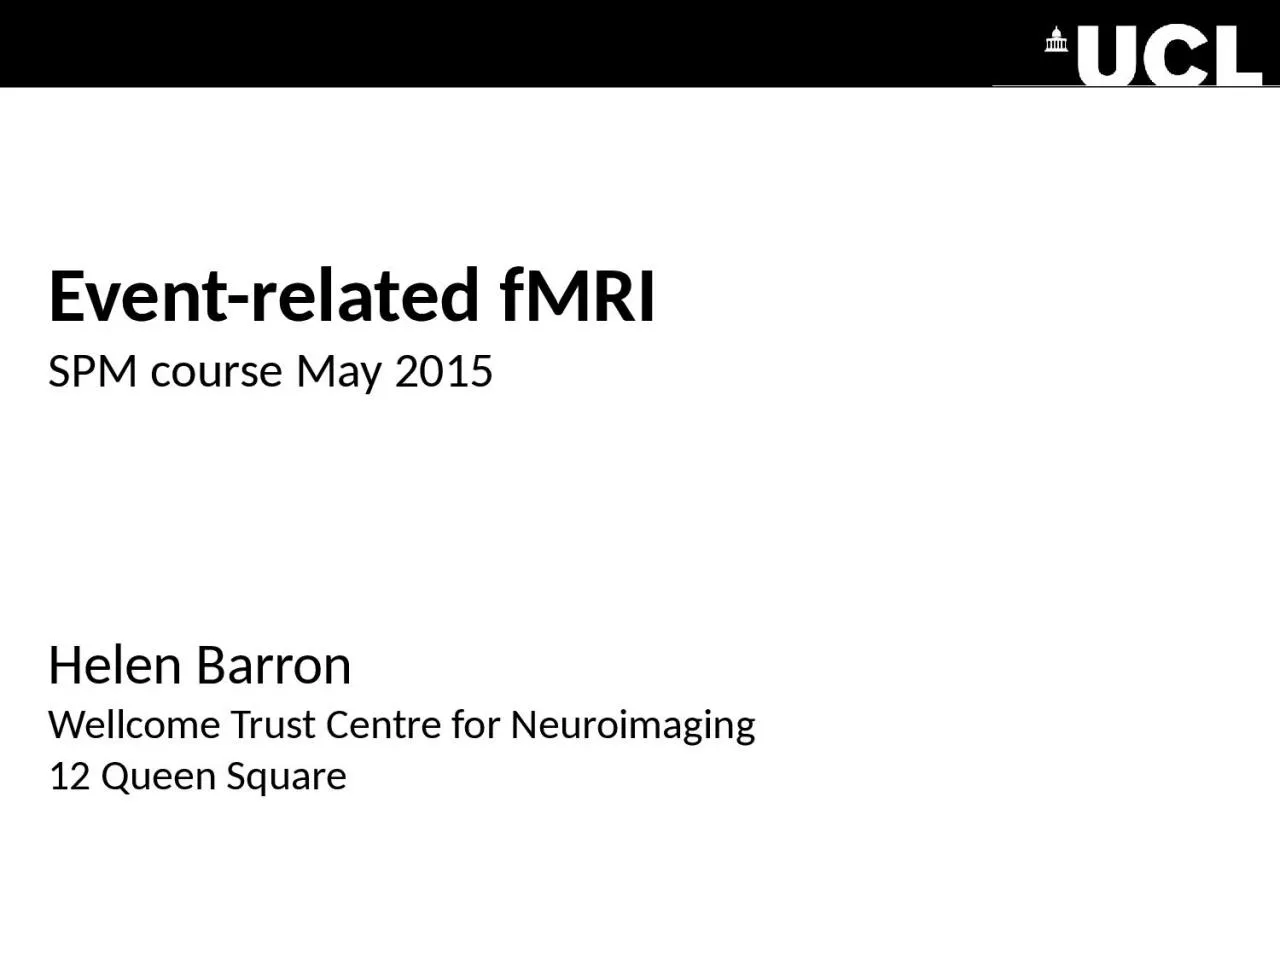 Event-related fMRI SPM course May 2015